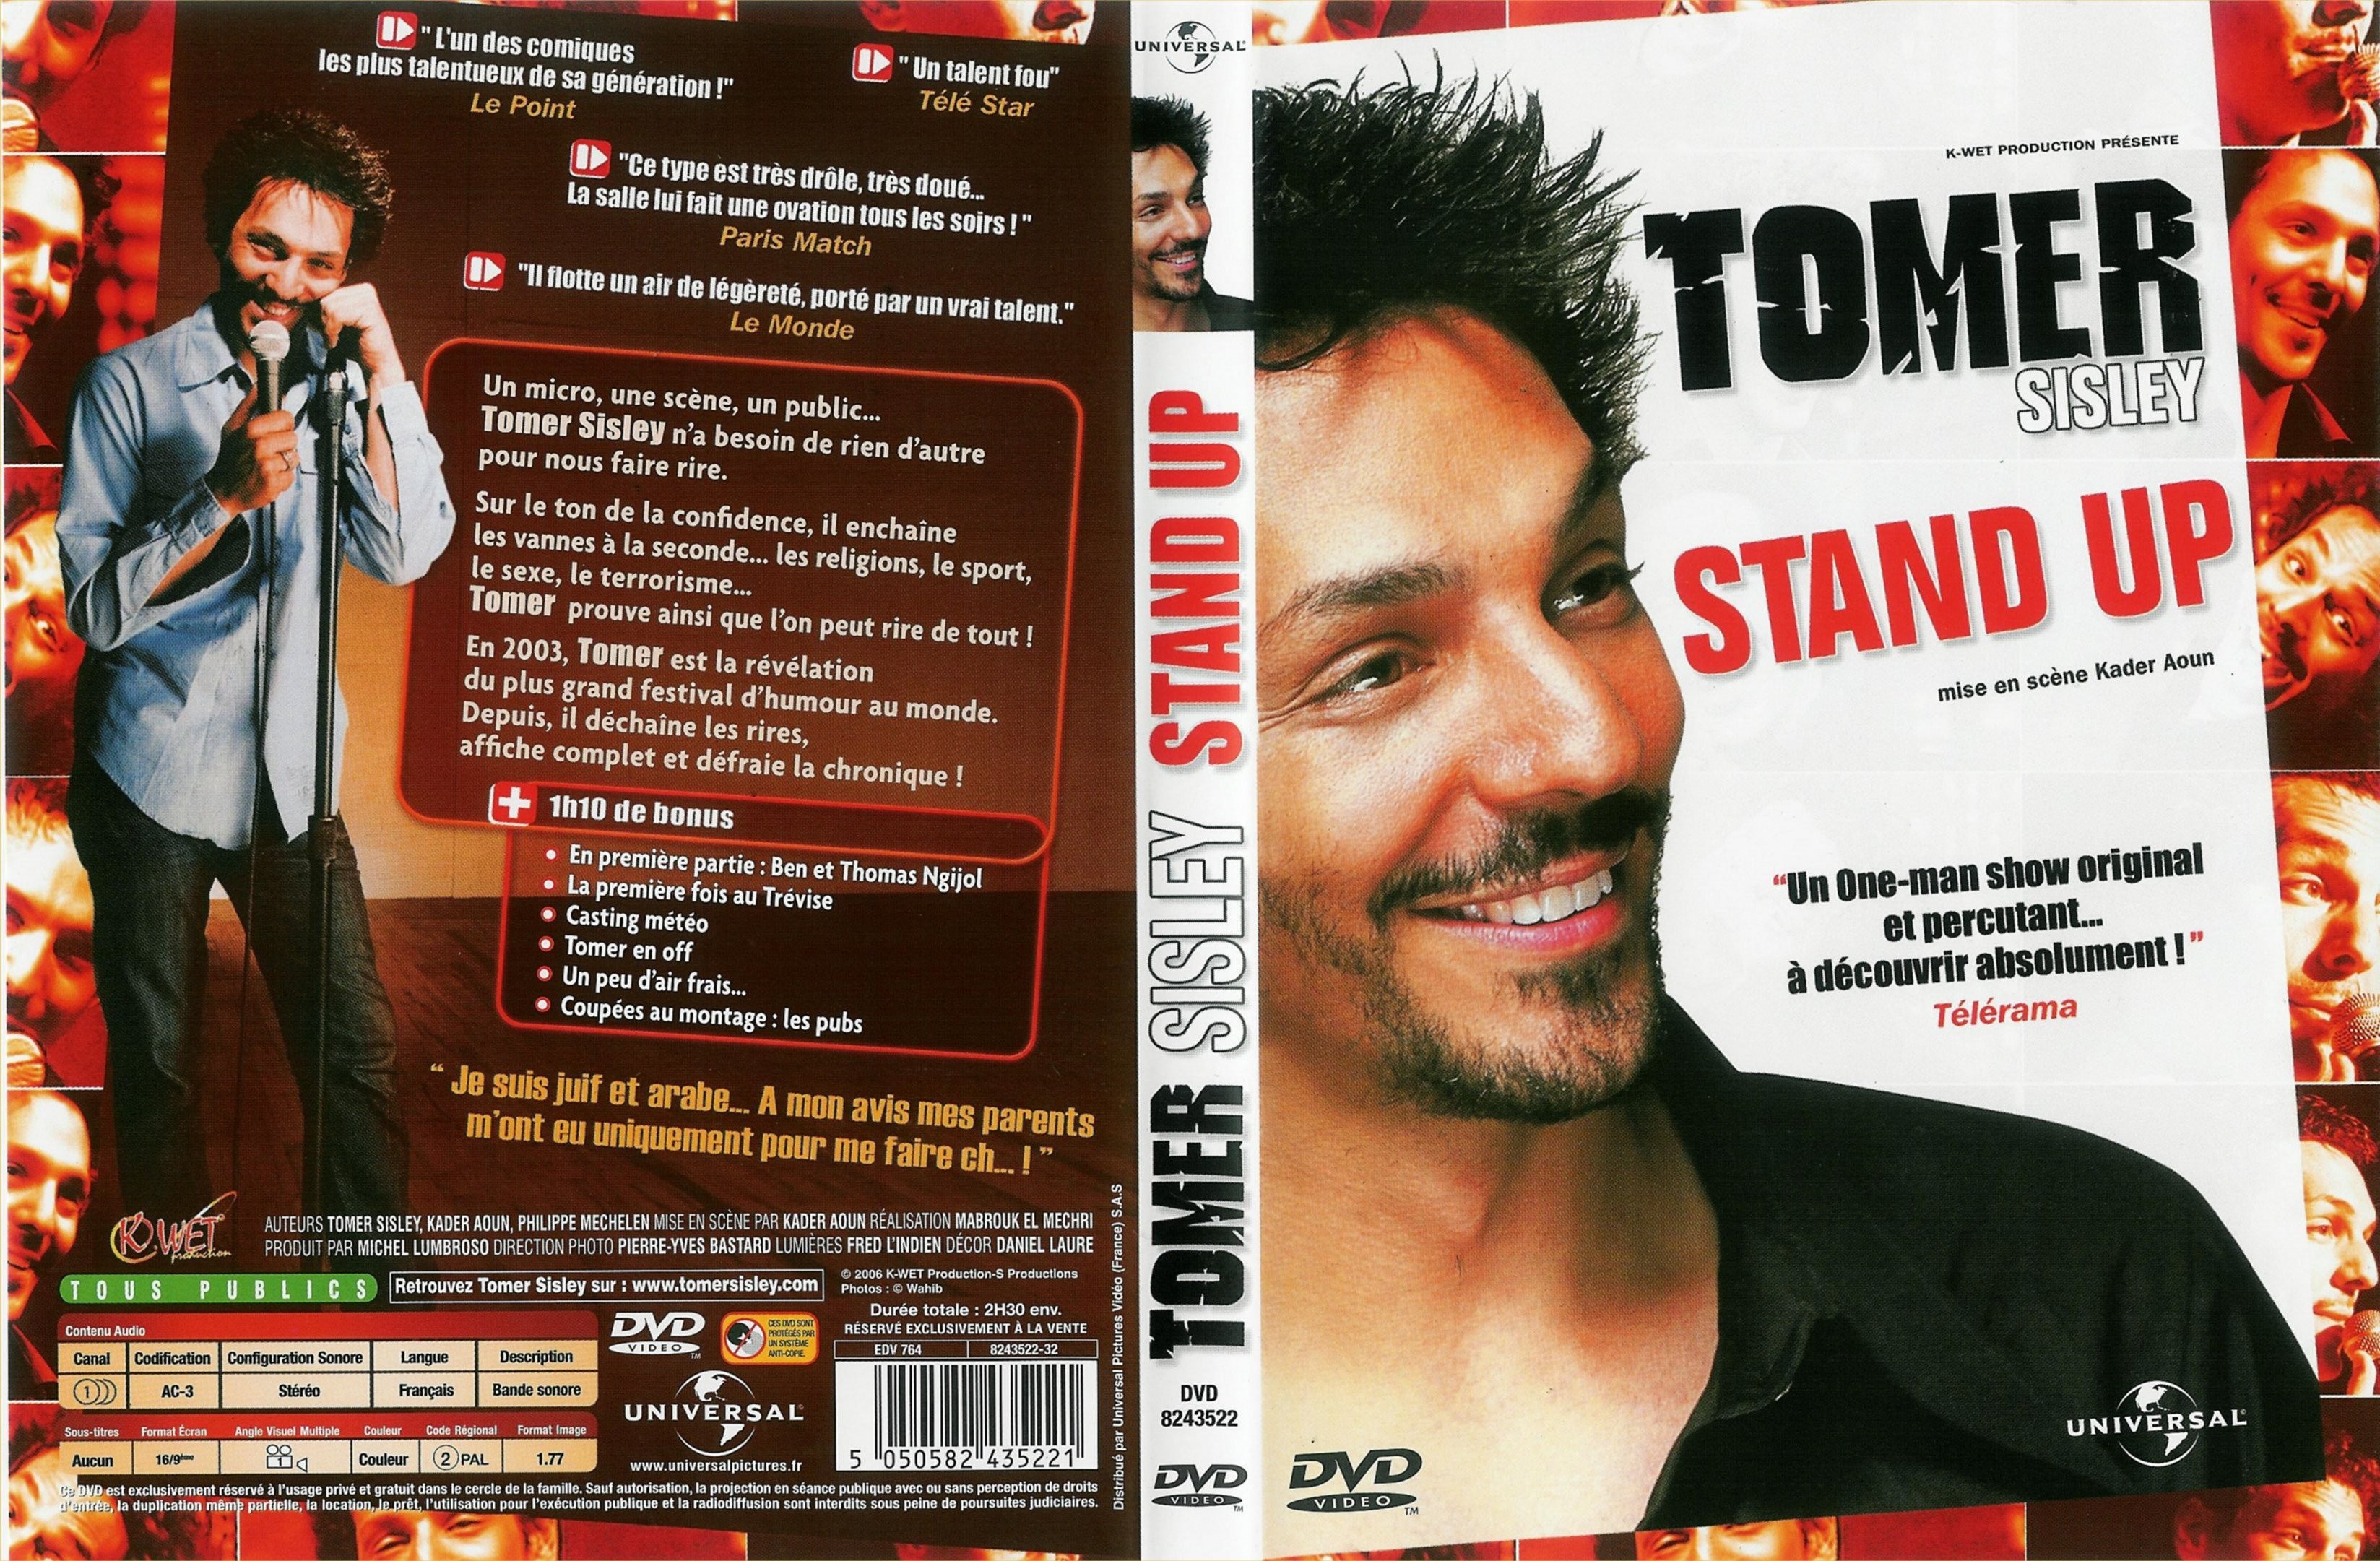 Jaquette DVD Tomer Sisley - stand up